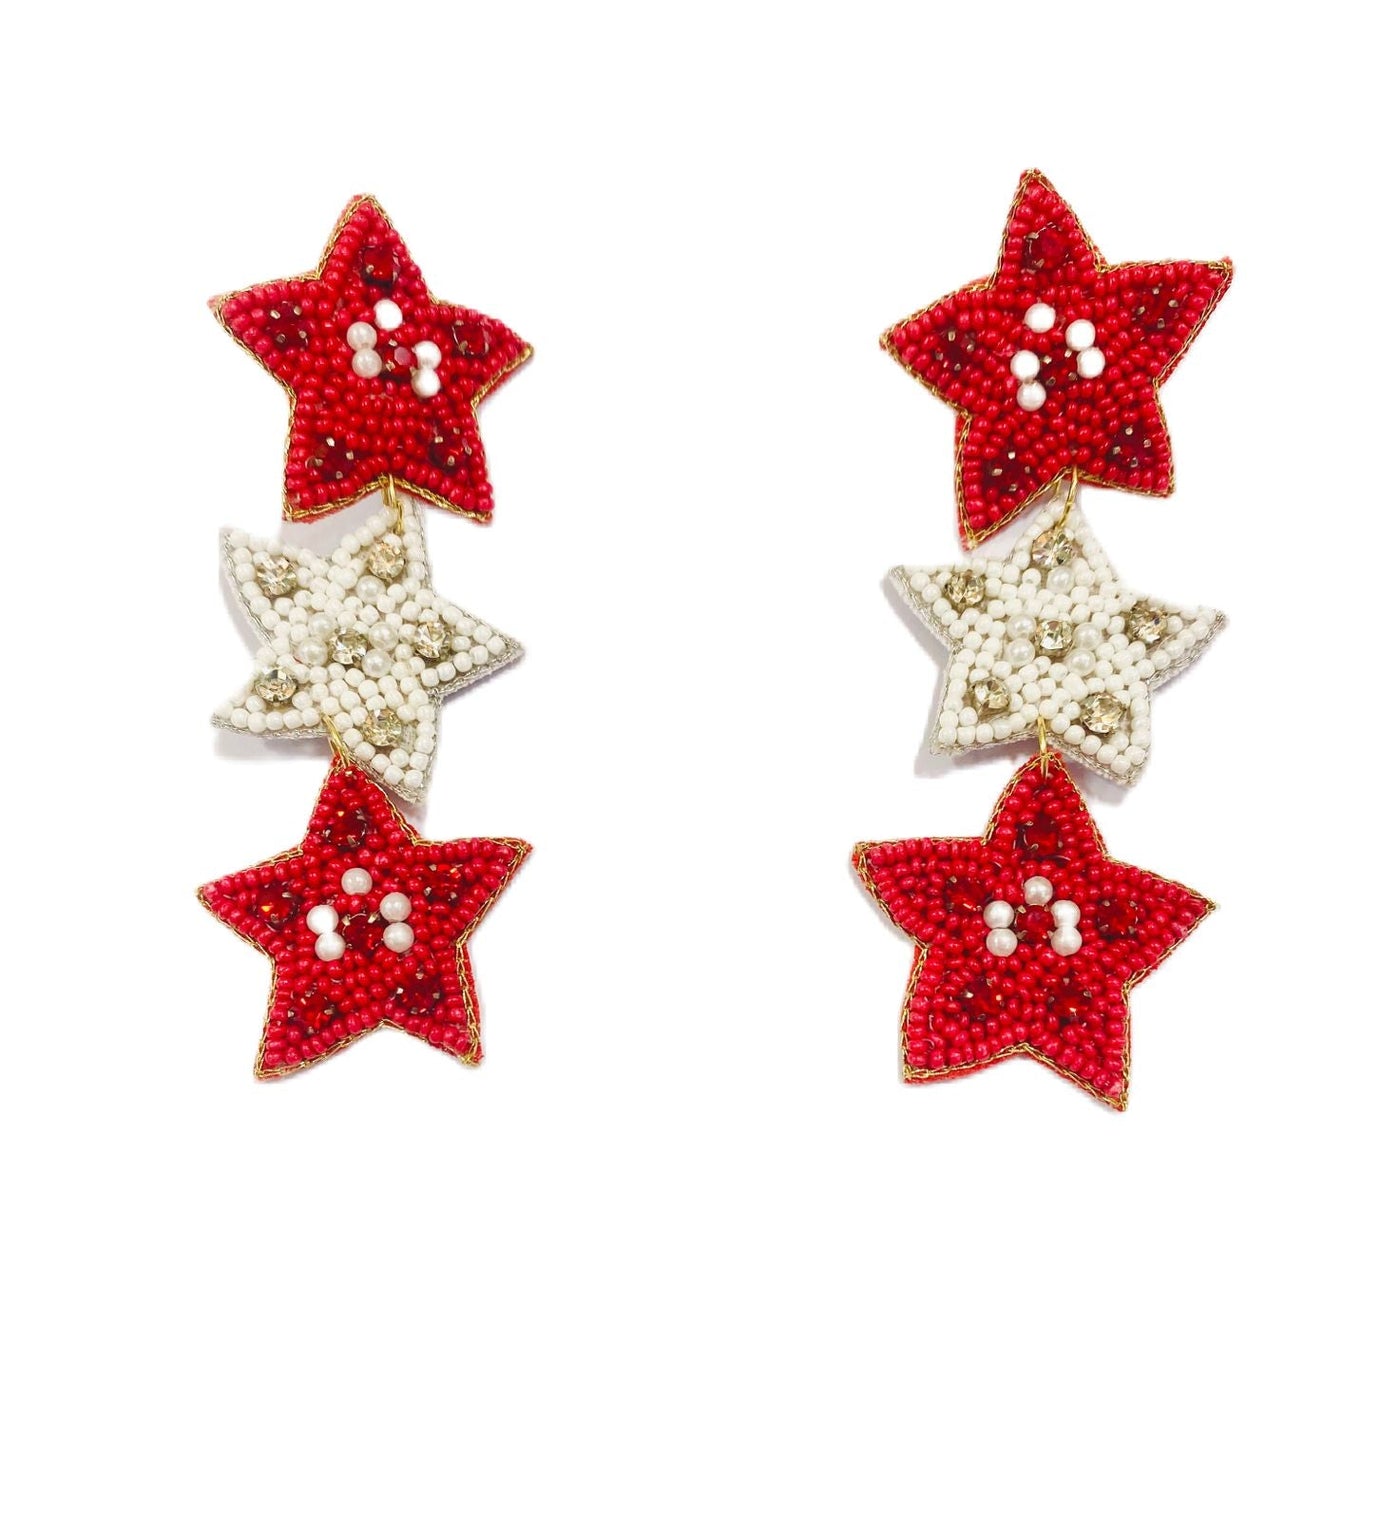 Triple Star Earrings - Red and White